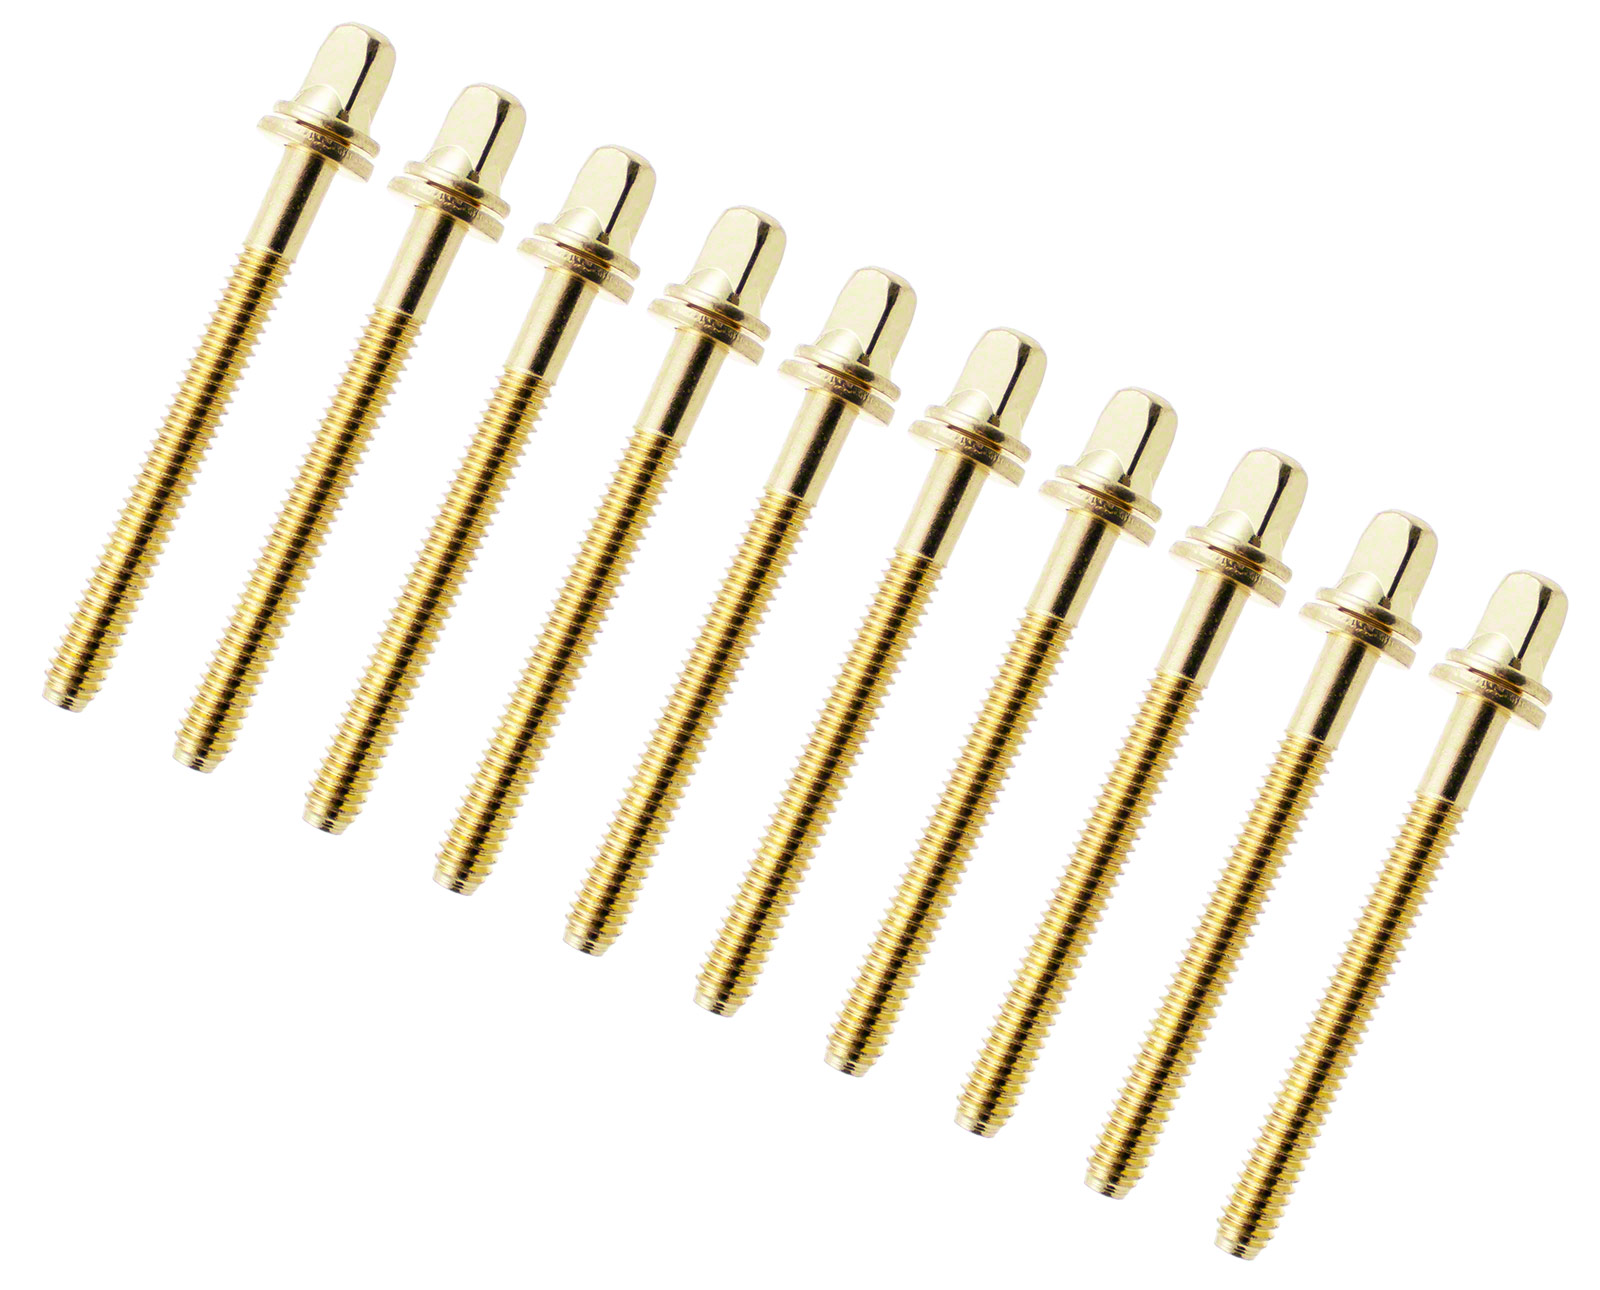 SPAREDRUM TRC-52W-BR - 52MM TENSION ROD BRASS WITH WASHER - 7/32